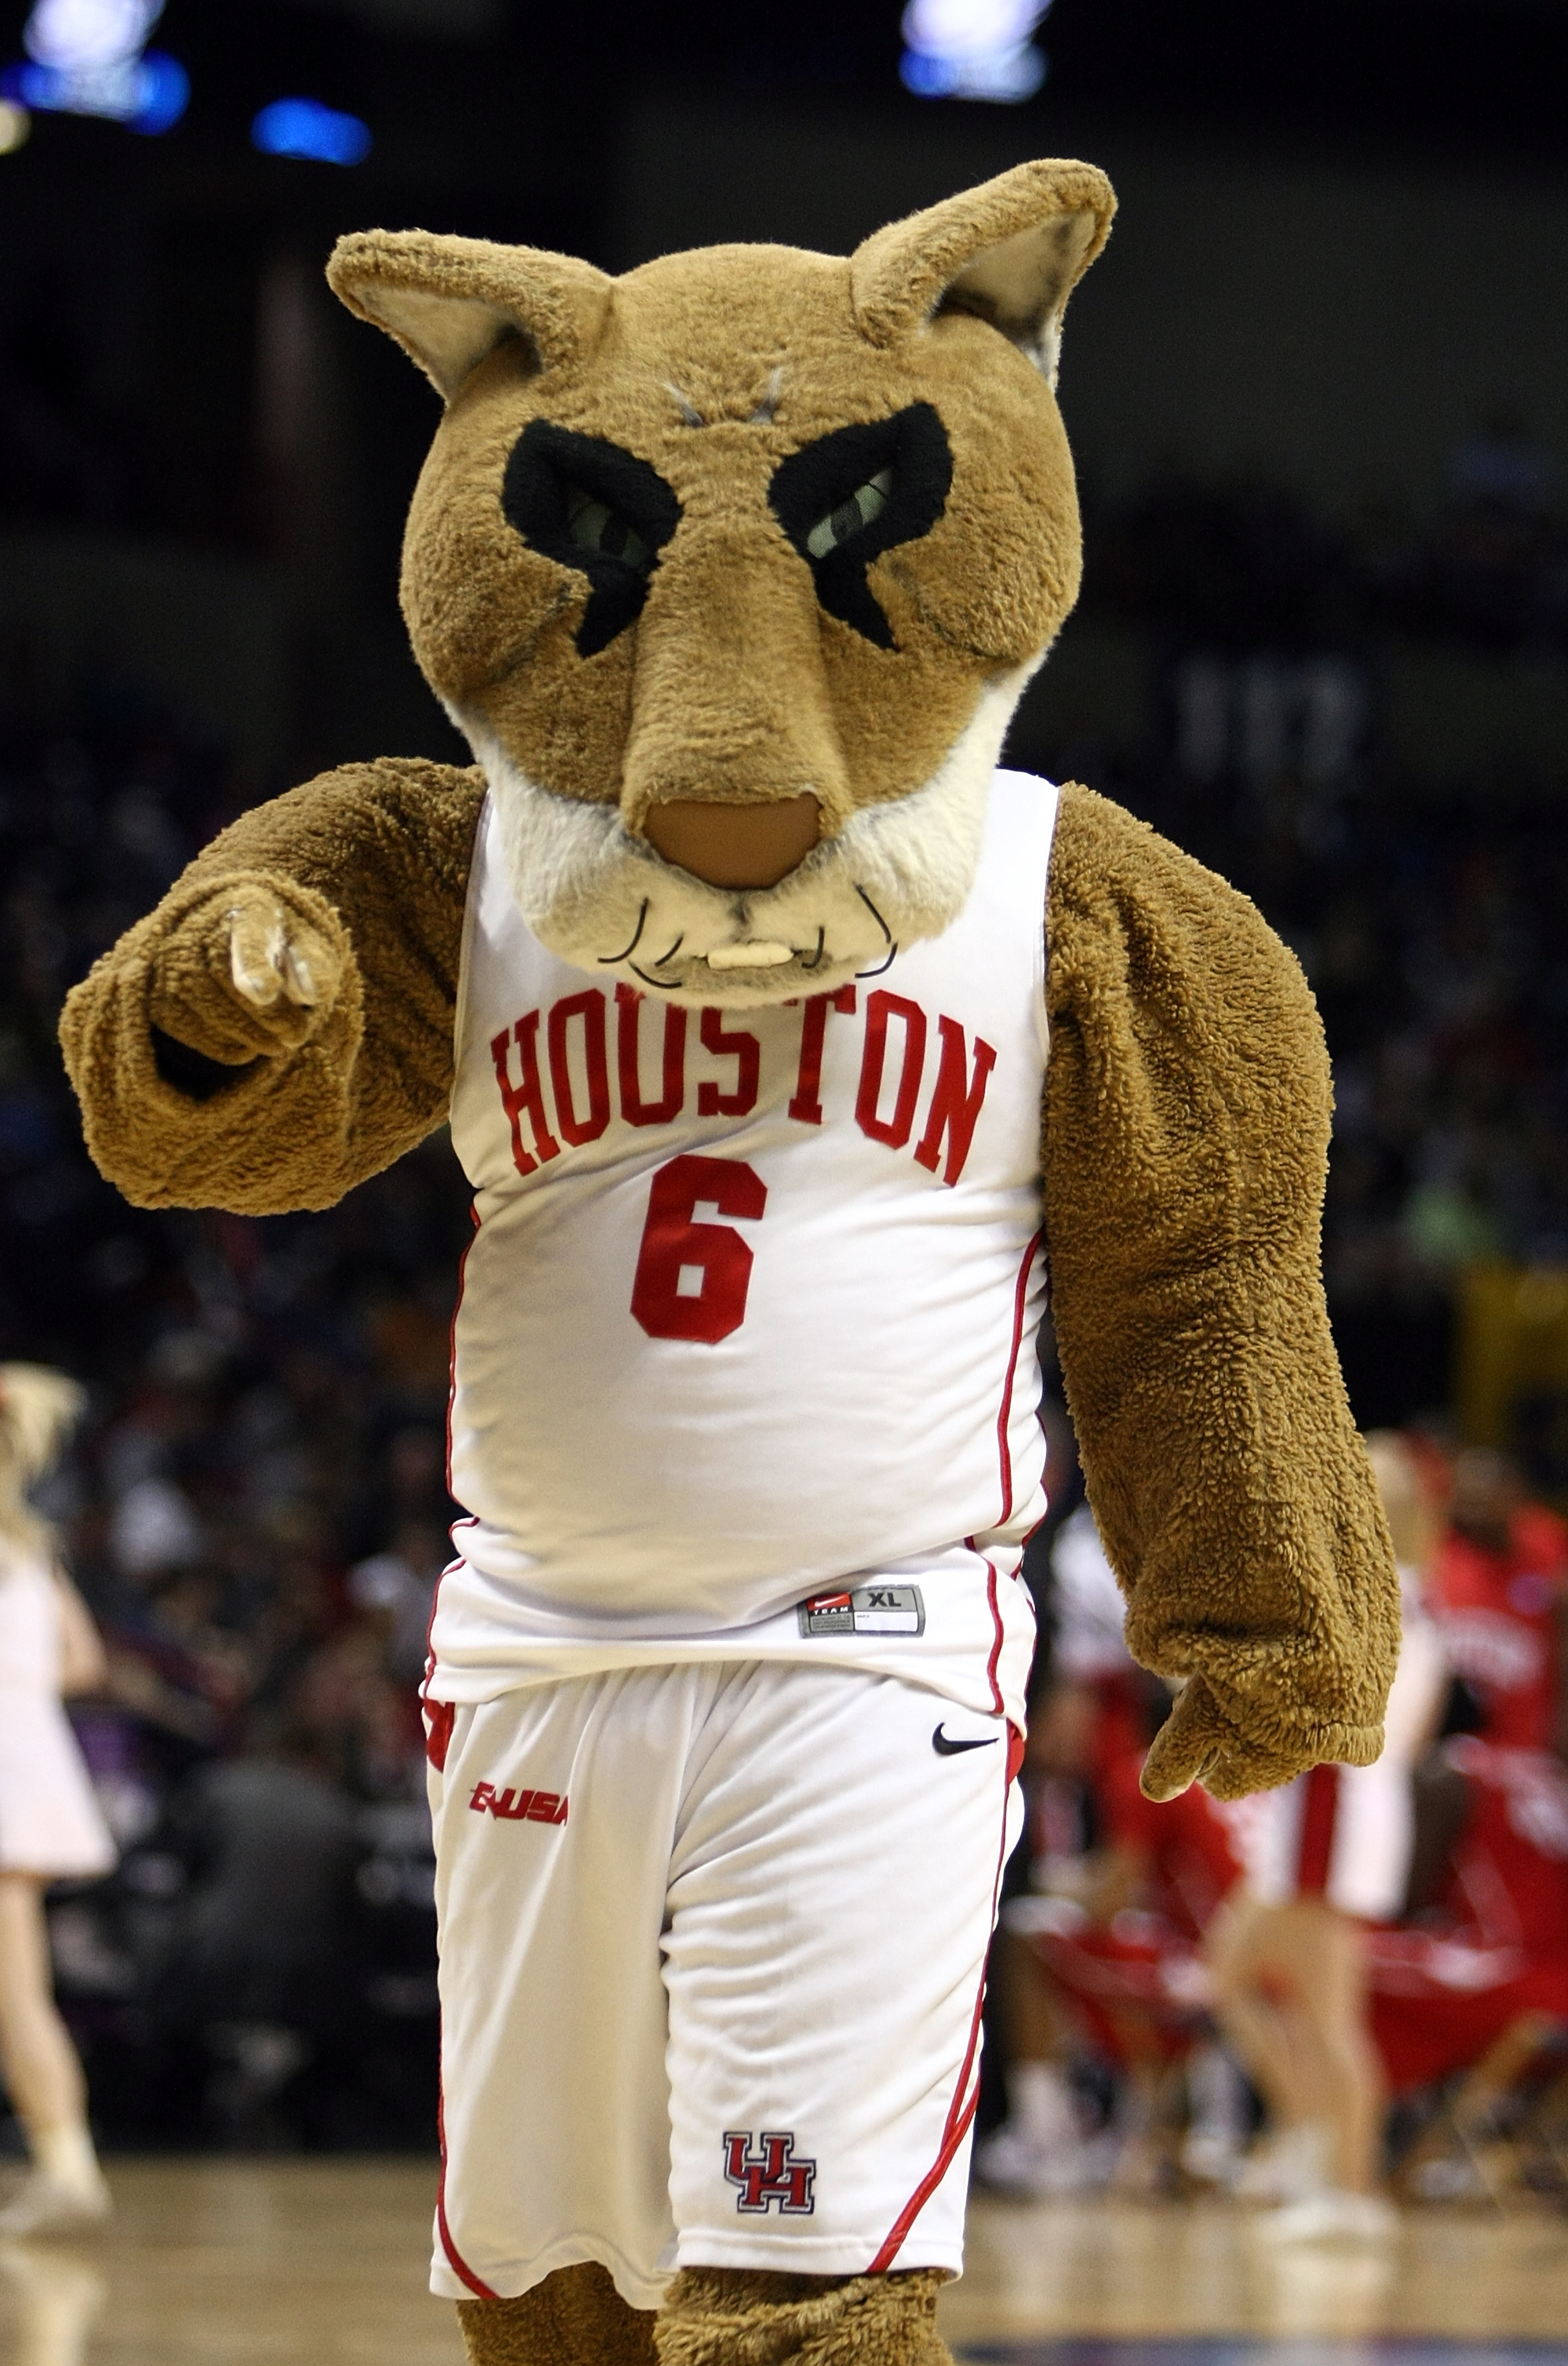 SPOKANE, WA - MARCH 19:  The Houston Cougars mascot performs during a pause in the action against the Maryland Terrapins  during the first round of the 2010 NCAA menÕs basketball tournament at Spokane Arena on March 19, 2010 in Spokane, Washington.  (Phot